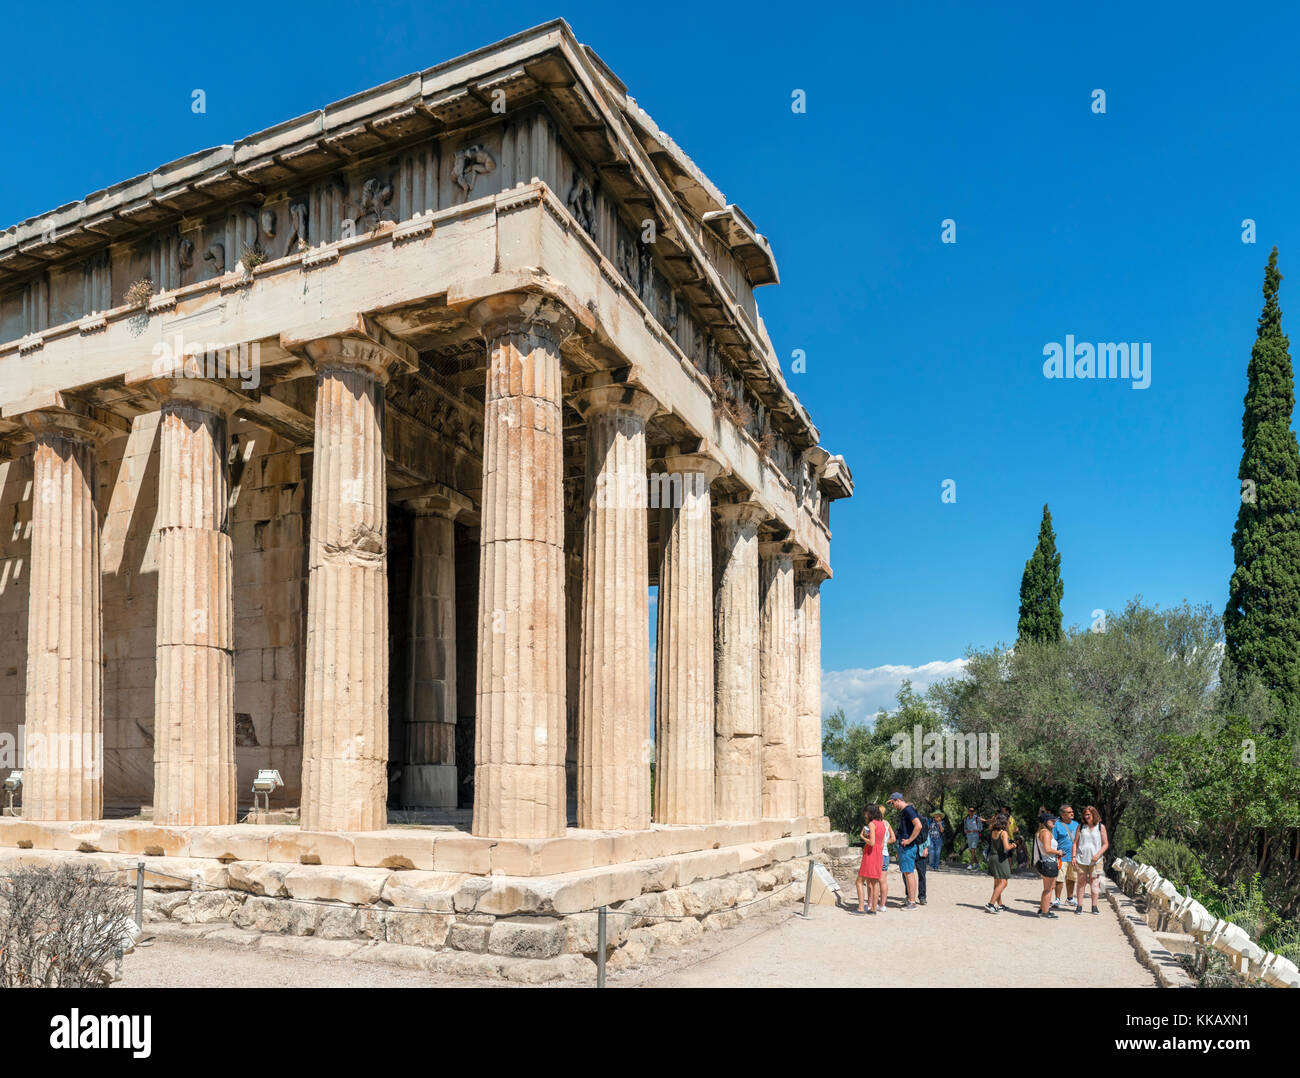 Tourists in front of the Temple of Hephaestus (Hephaistos) in the precinct of the Ancient Agora, Athens, Greece Stock Photo